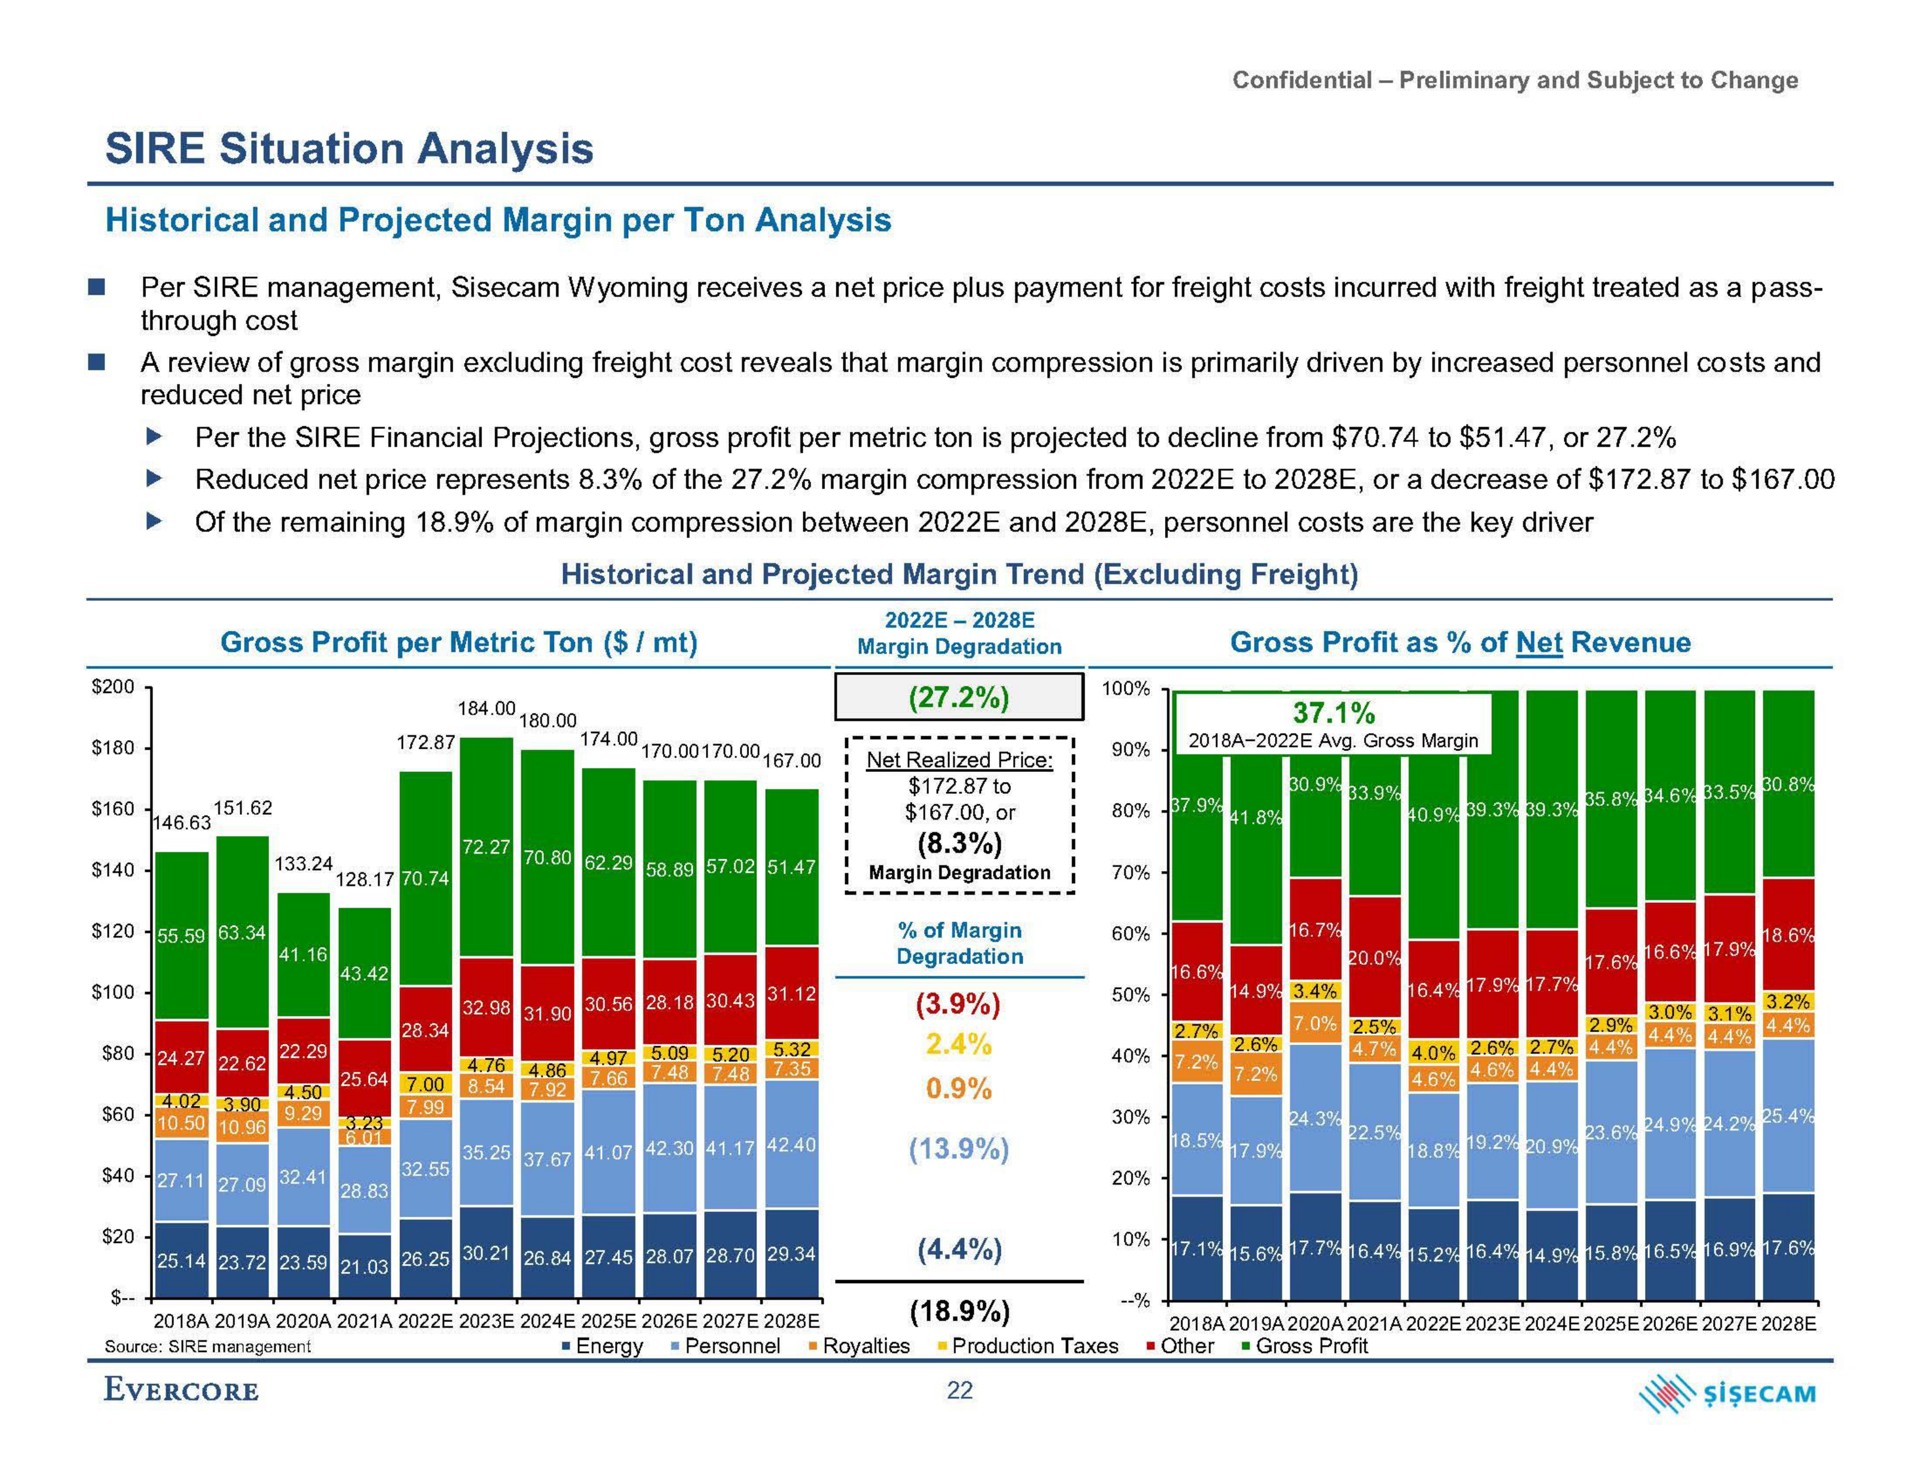 sire situation analysis historical and projected margin per ton analysis or a a | Evercore